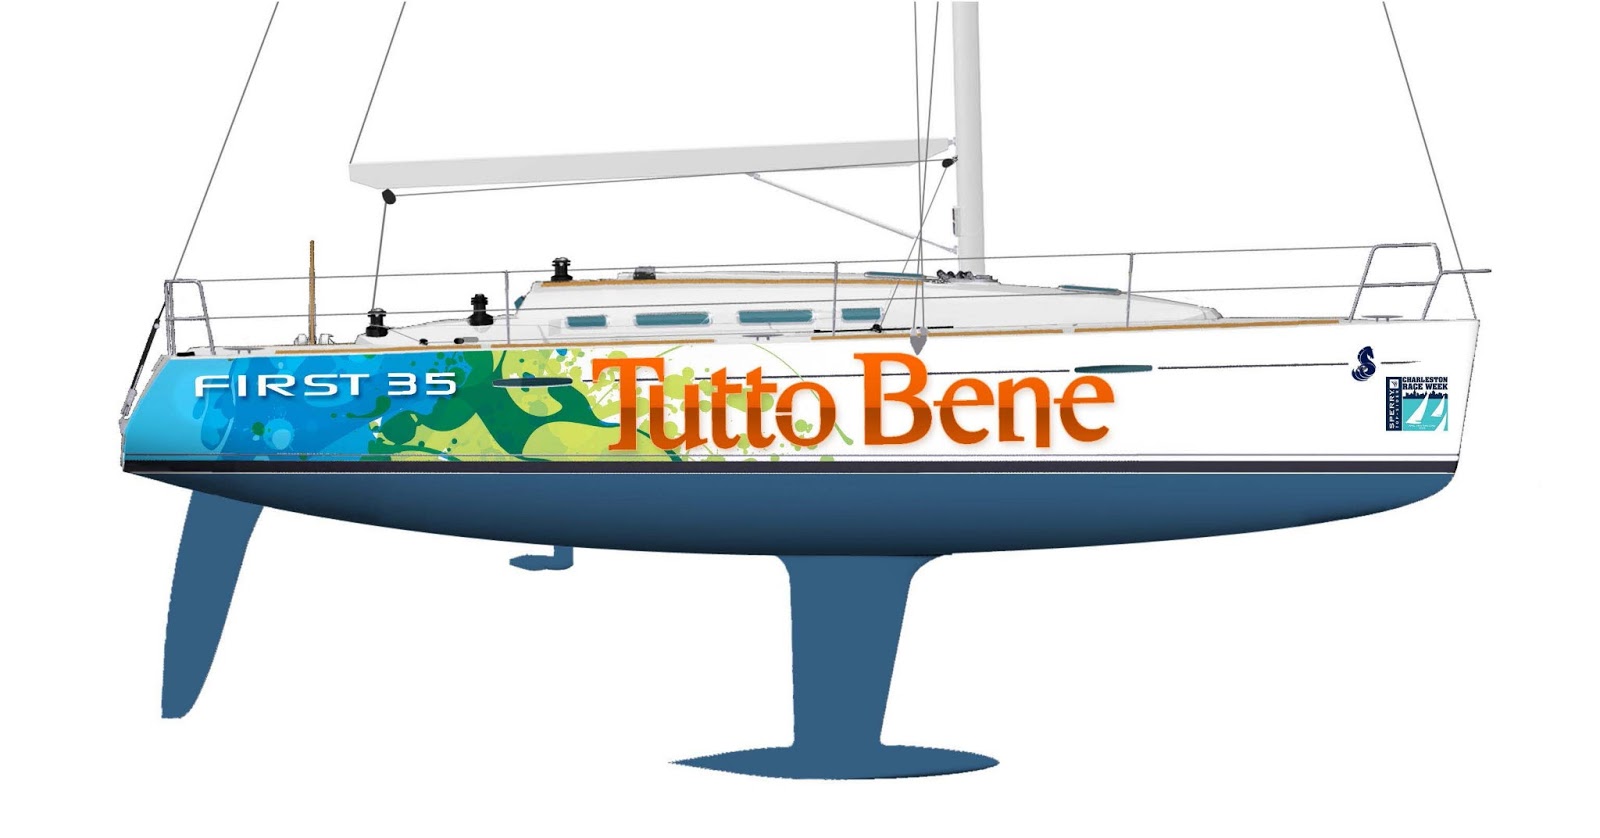 St. Barts Yachts: "Tutto Bene" Beneteau First 35